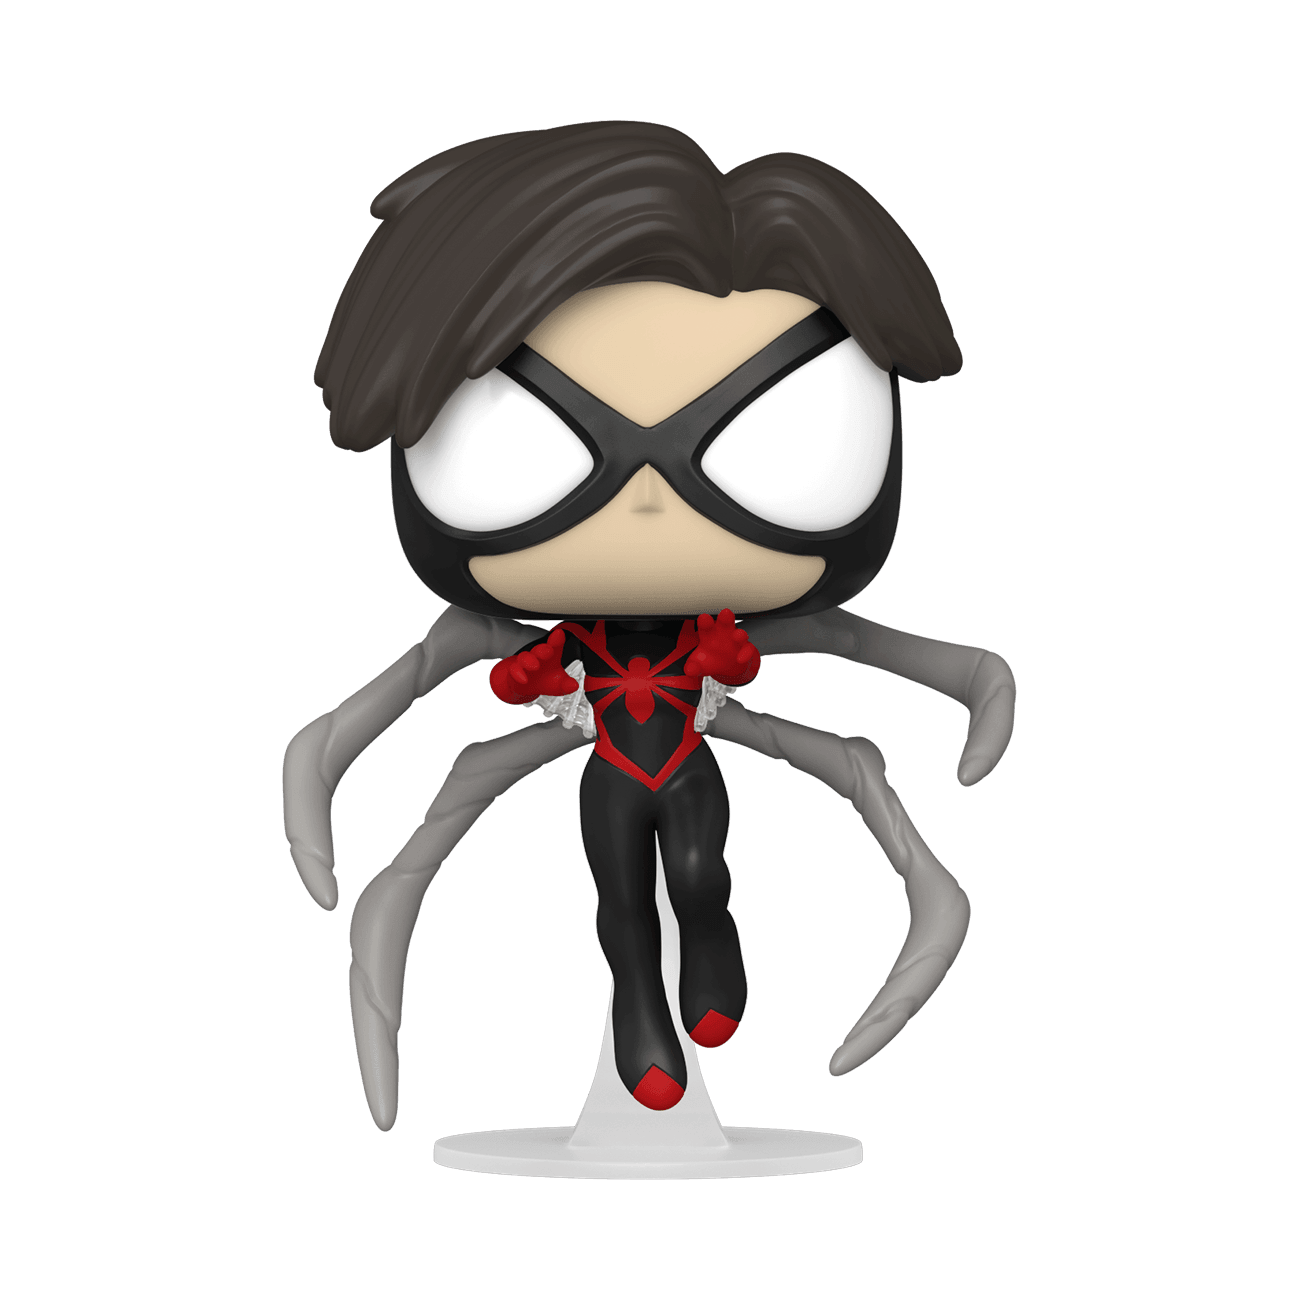 Funko Pop Marvel: Beyond Amazing - Spider-Woman Mattie Franklin - BumbleToys - 18+, Action Figures, Avengers, Boys, Characters, Funko, Girls, Pre-Order